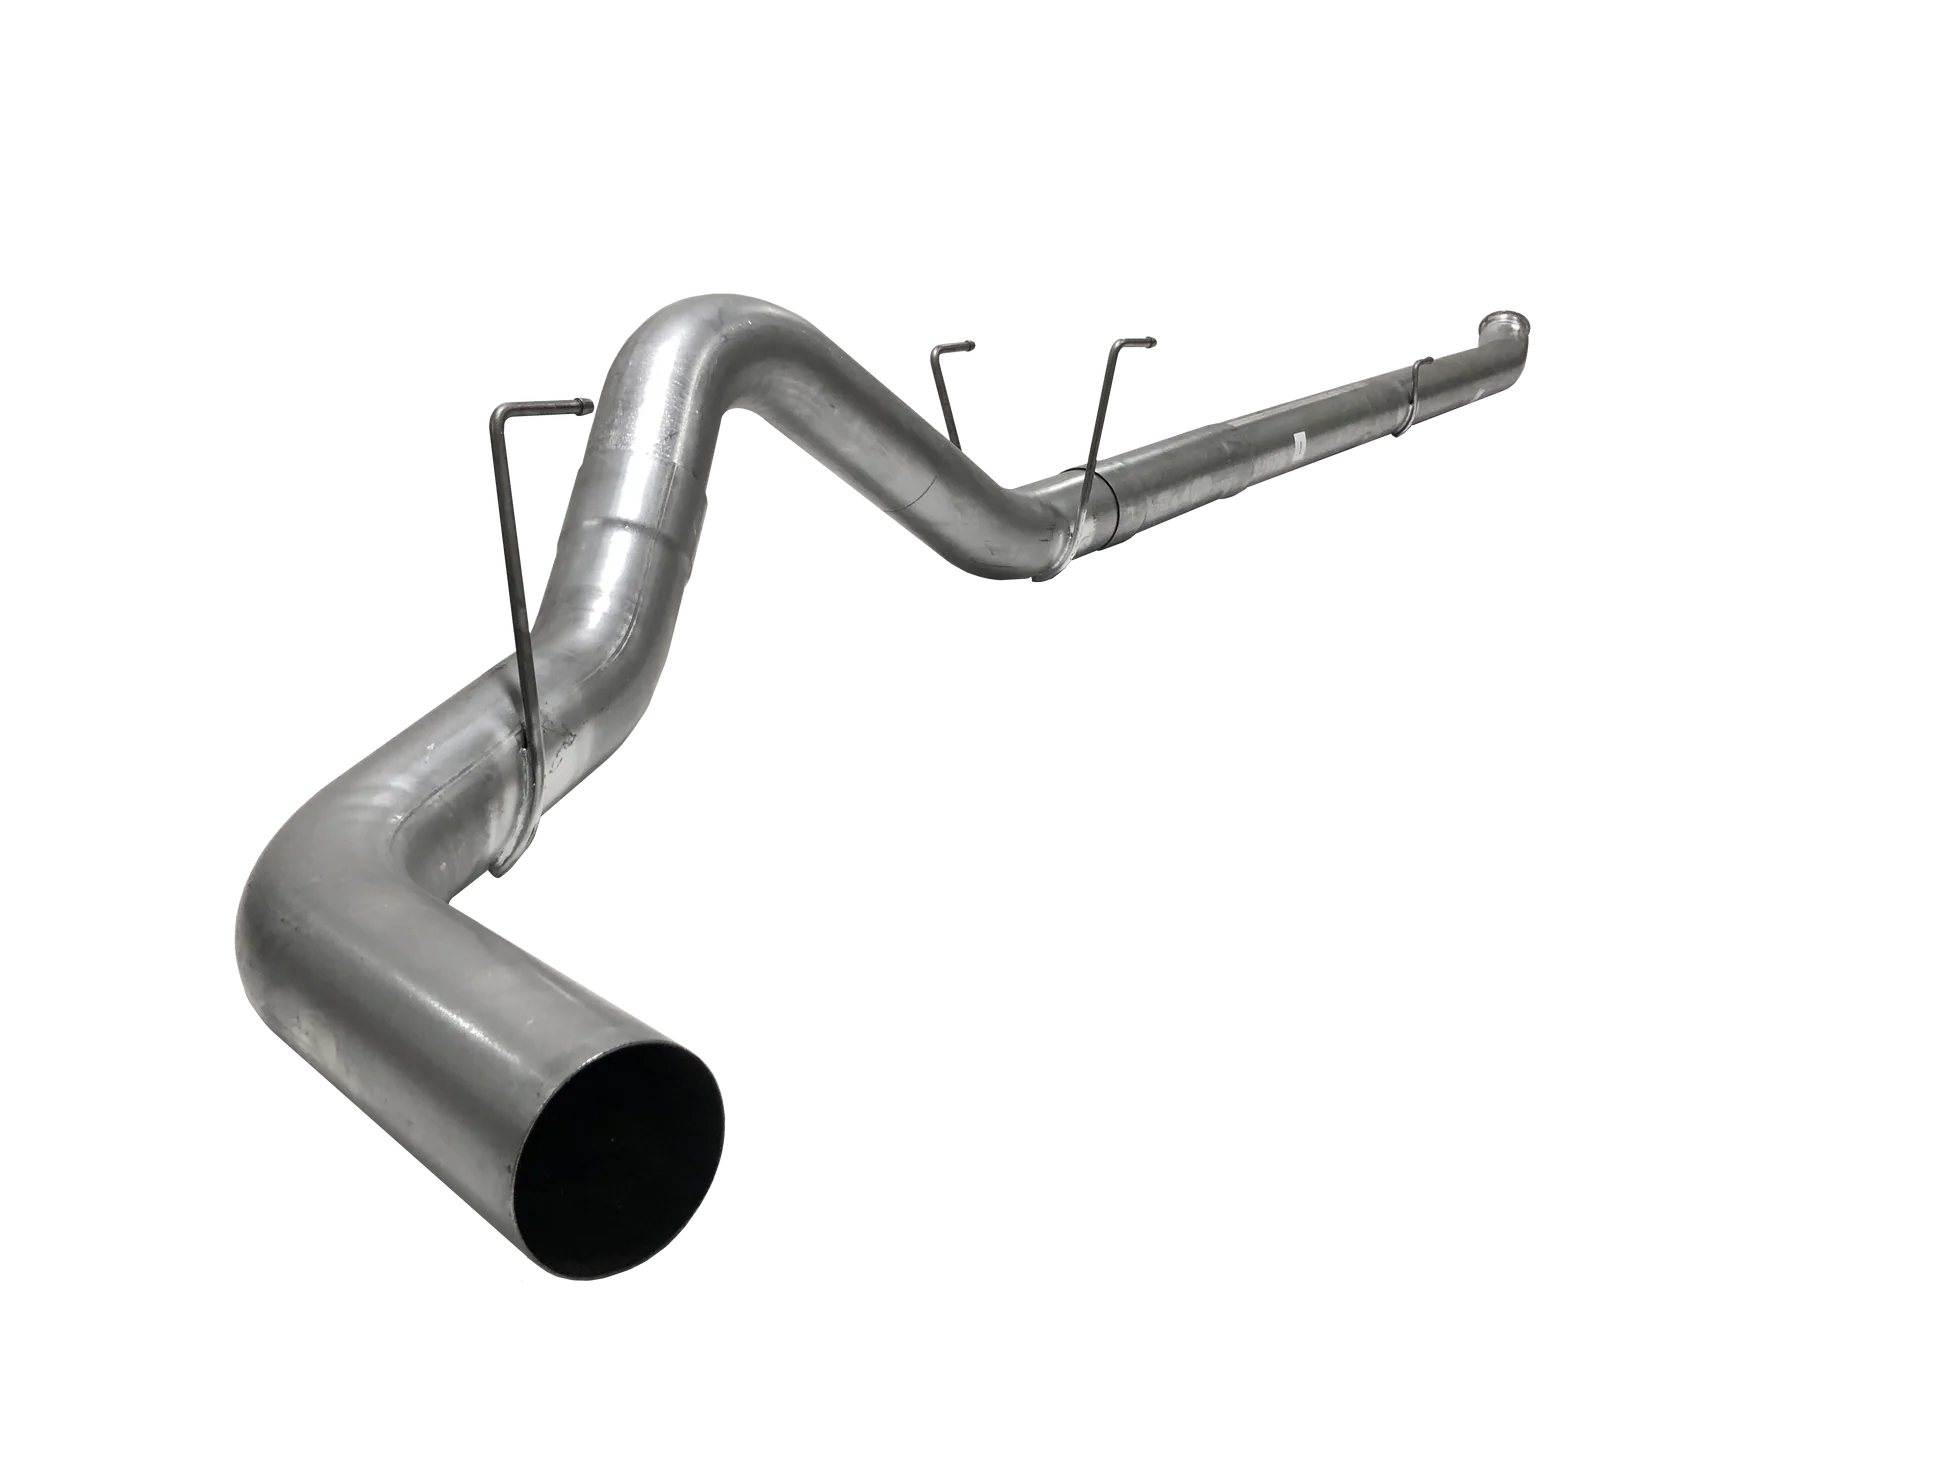 511017 511018 512014 512015 Mel's Manufacturing 5" Flex Pipe Back Single | 2019+ Ram 3500 6.7L Cummins Mels Mfg FloPro Flo-Pro Flo Pro Hell On Wheels Performance Ltd Limited Canadian Owned and Operated Online Diesel Parts Distribution & Wholesale Supply Center in Alberta Canada Shipping Supplying to Alberta British Columbia Sask Saskatchewan Manitoba Ontario Quebec Newfoundland Labrador New Brunswick Nova Scotia Prince Edward Island AB BC SK MB ON QC PQ NS NB NFLD N.L. PEI